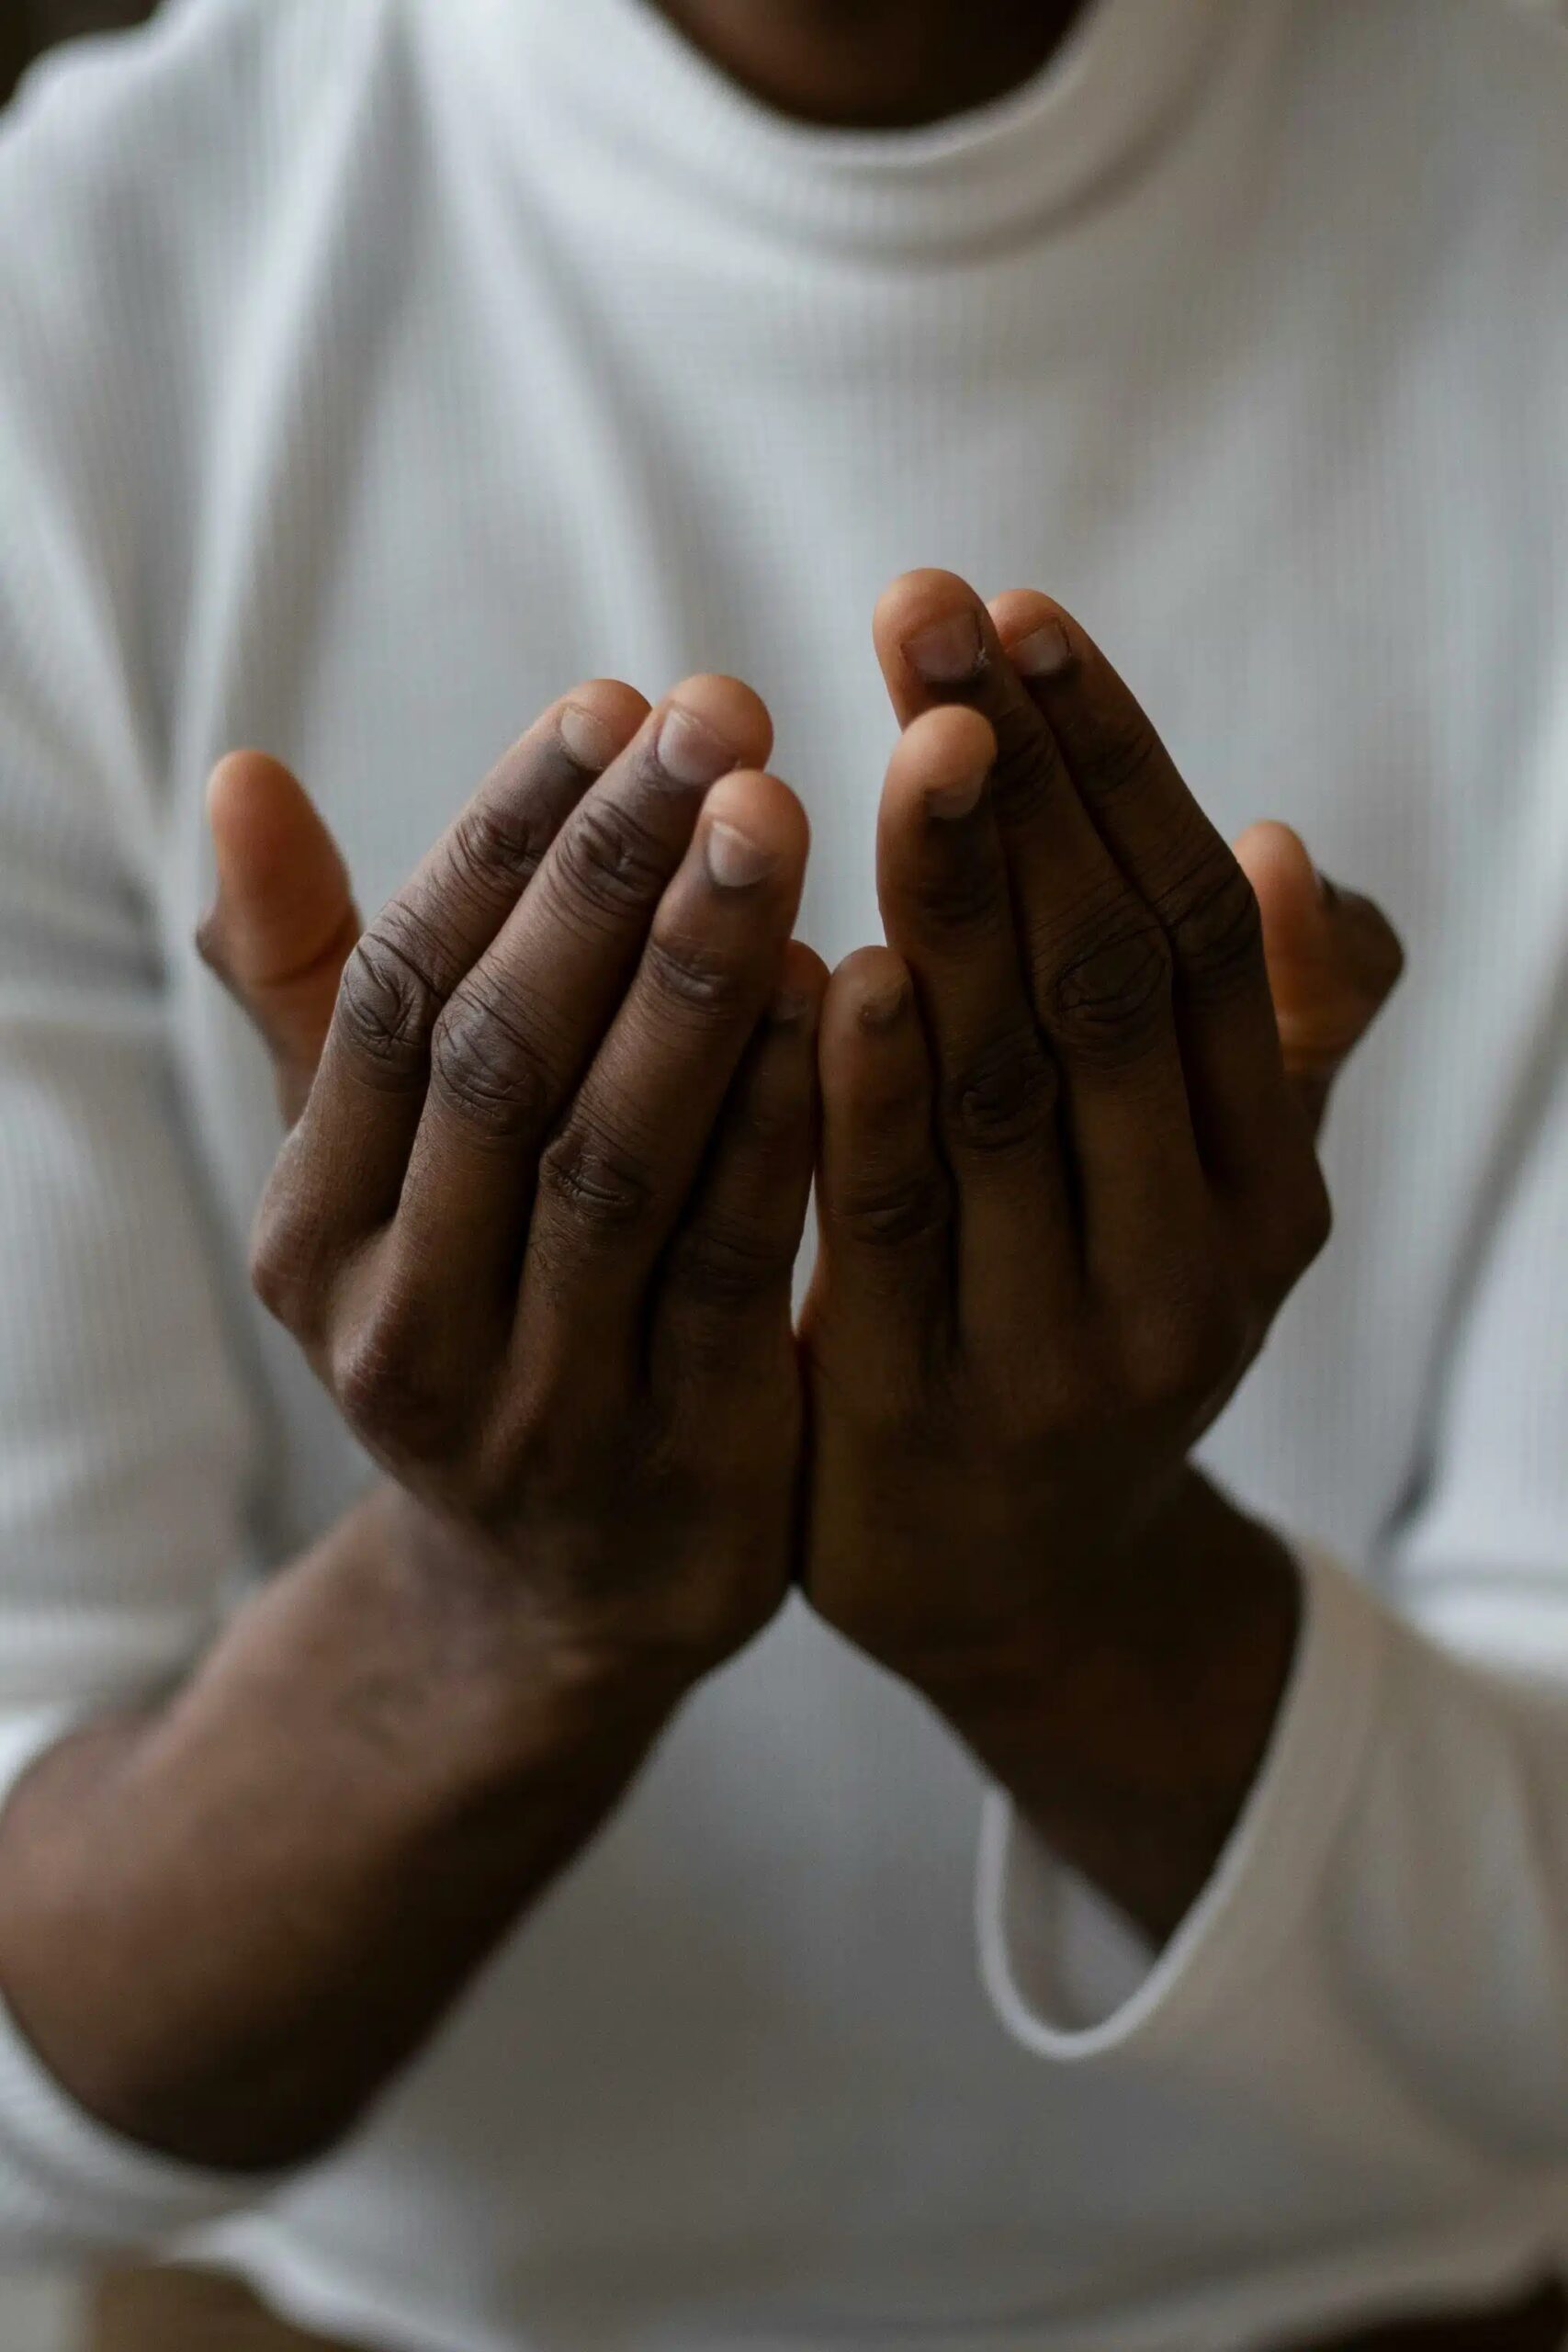 A Black person holding their hands cupped like a prayer or offering.